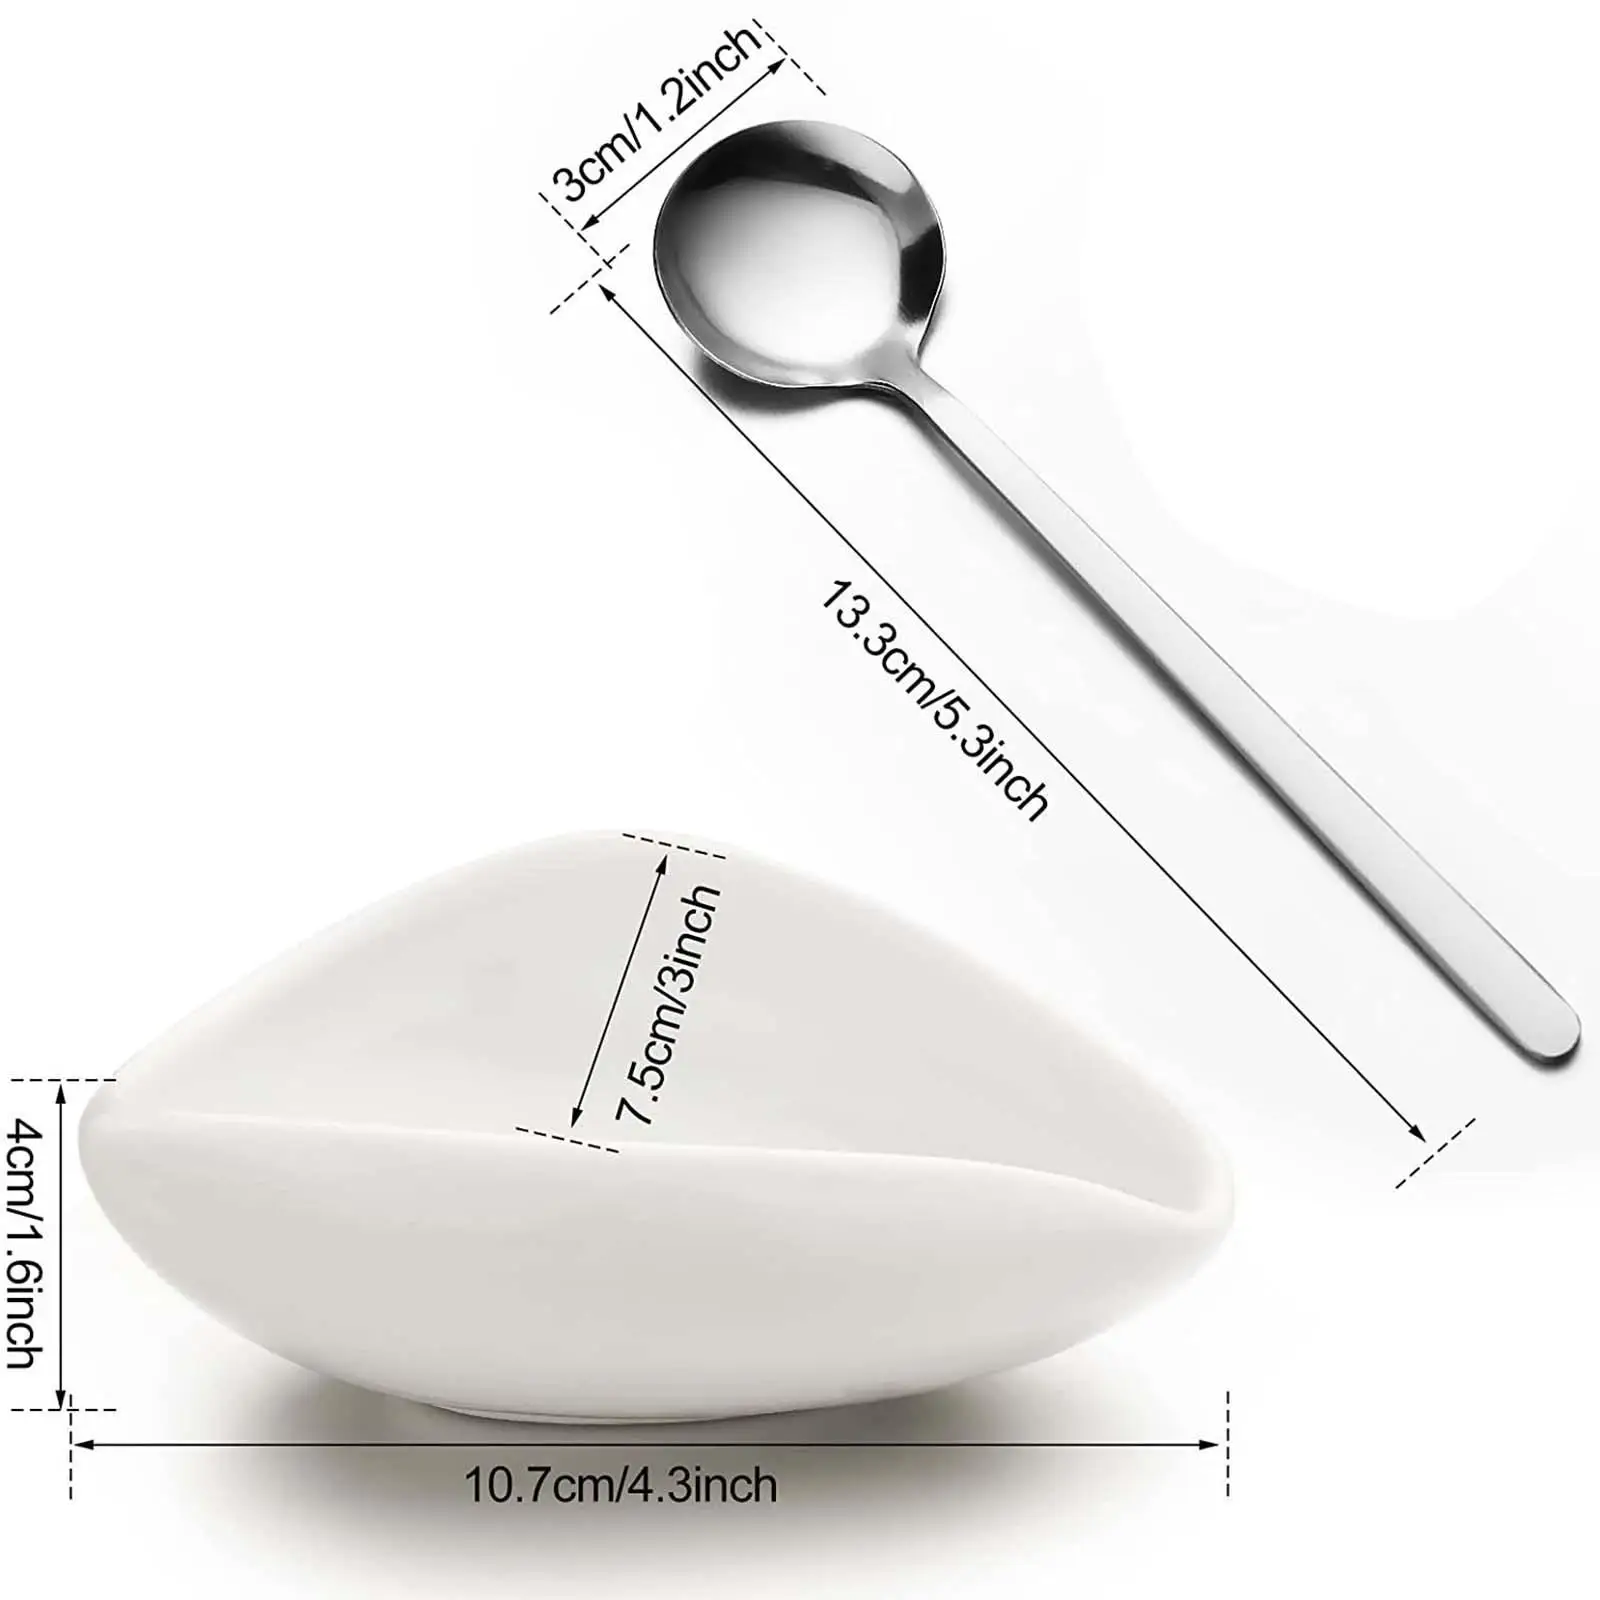 Coffee Bean Dosing Bowl Utensil Tea Accessory Coffee Spoon Single Coffee Tray for Dining Room Cafe Office Home